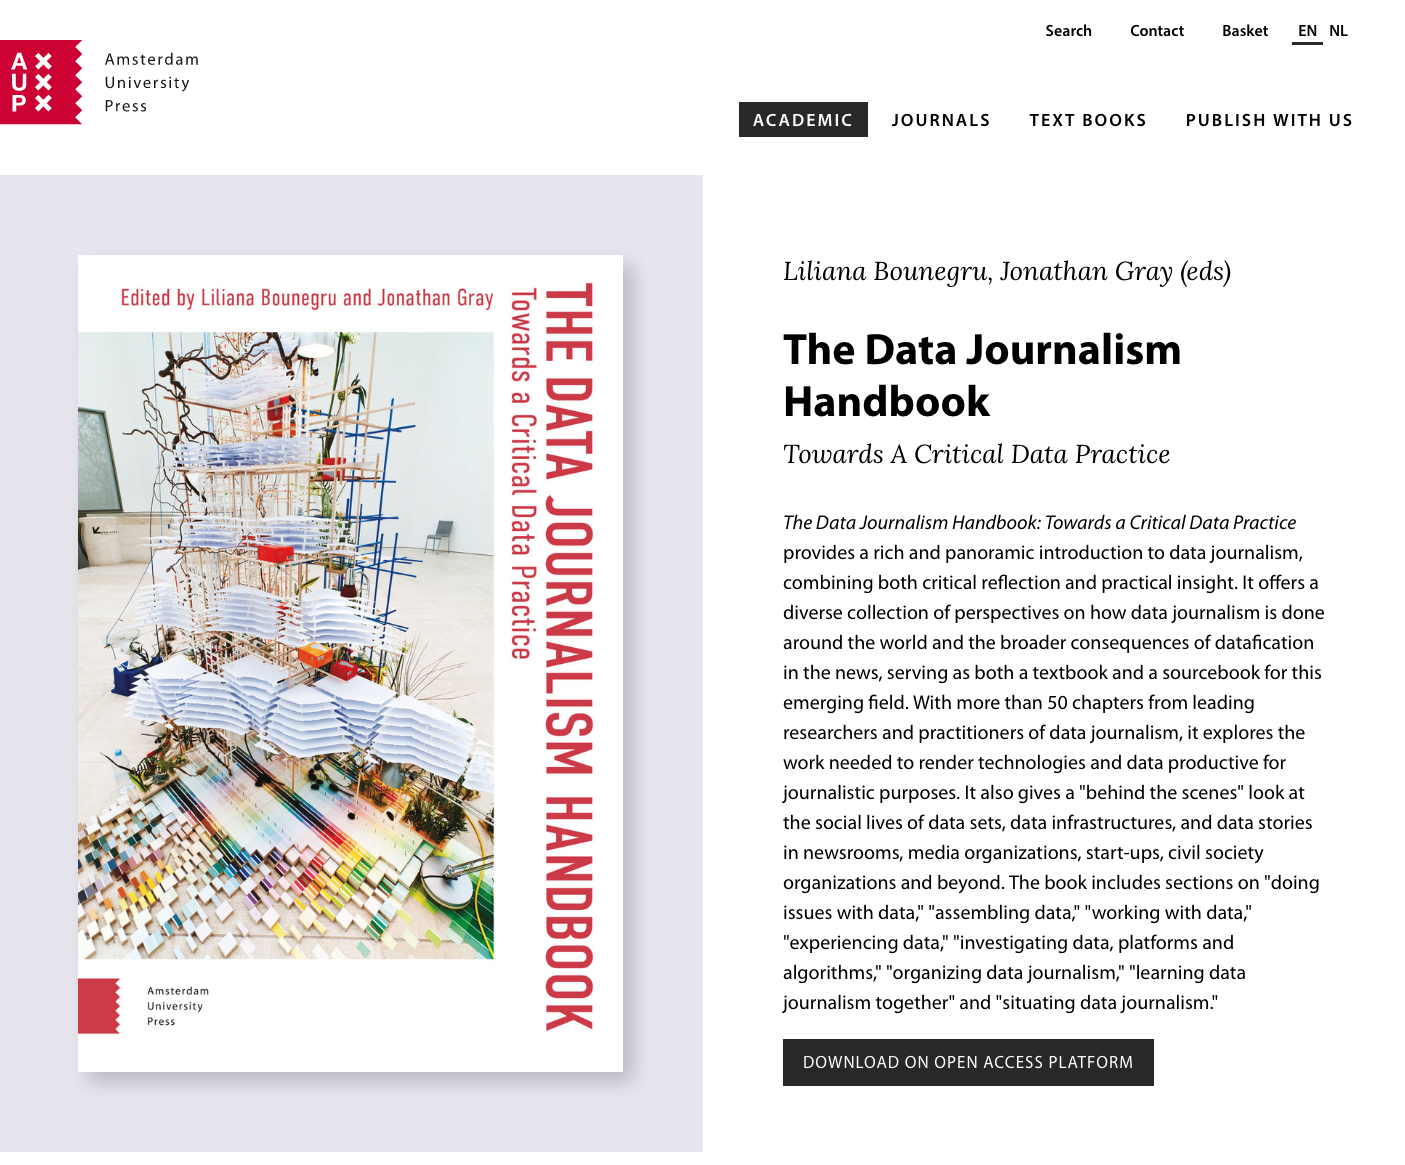 Cover of the Data Journalism Handbook as published by the Amsterdam University Press